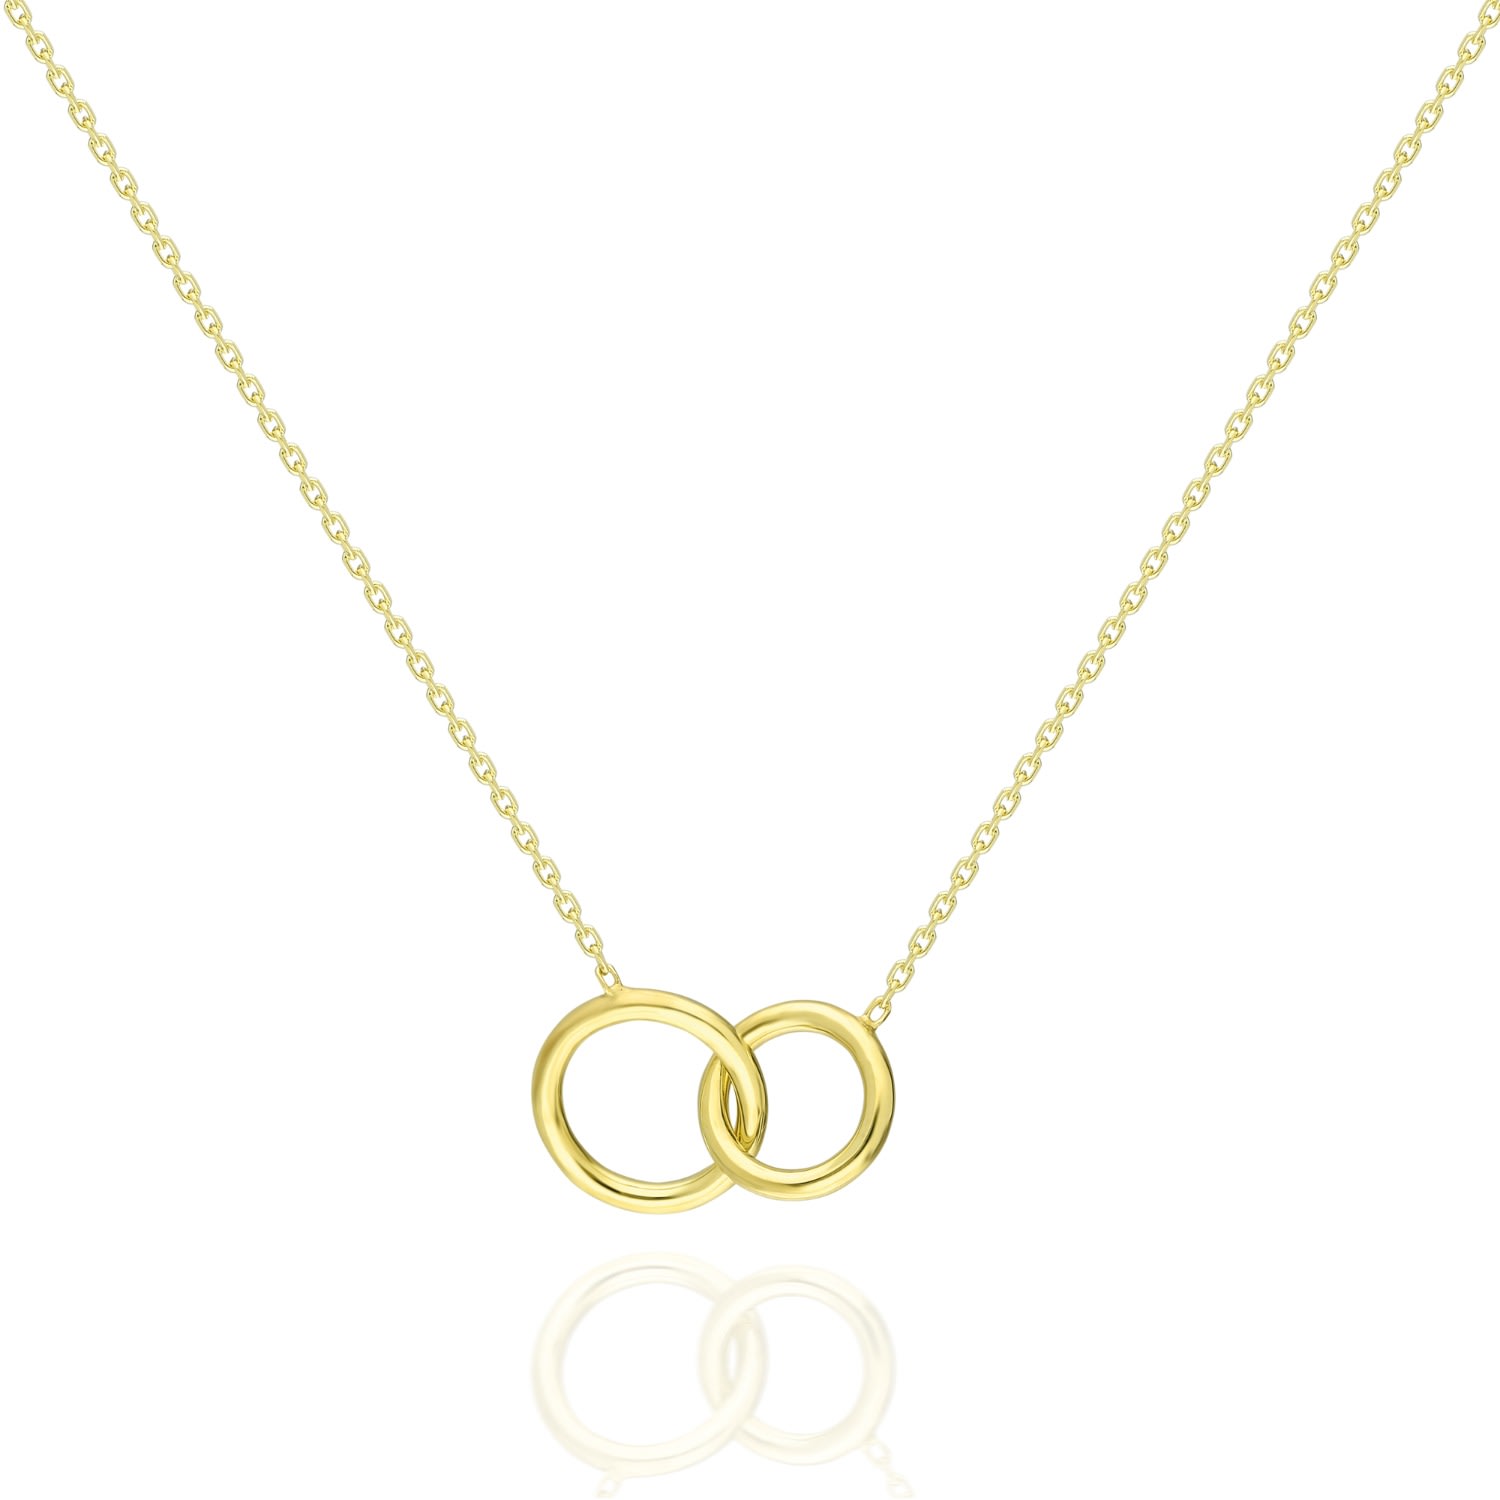 Ana Dyla Women's Nydia Necklace Gold Vermeil